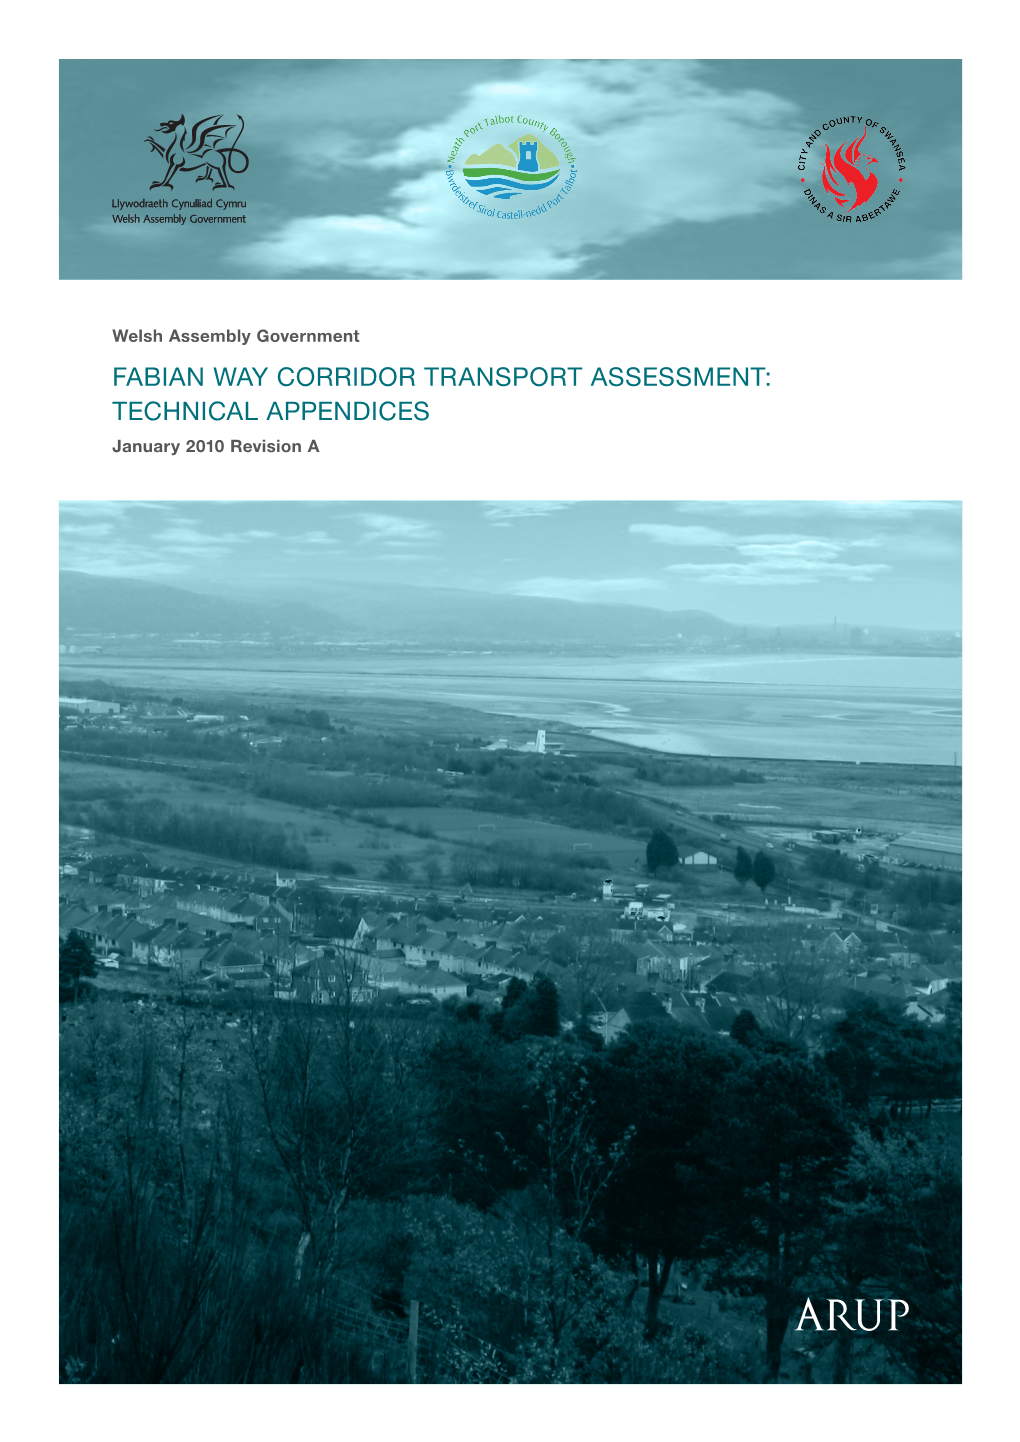 FABIAN WAY CORRIDOR TRANSPORT ASSESSMENT: TECHNICAL APPENDICES January 2010 Revision A